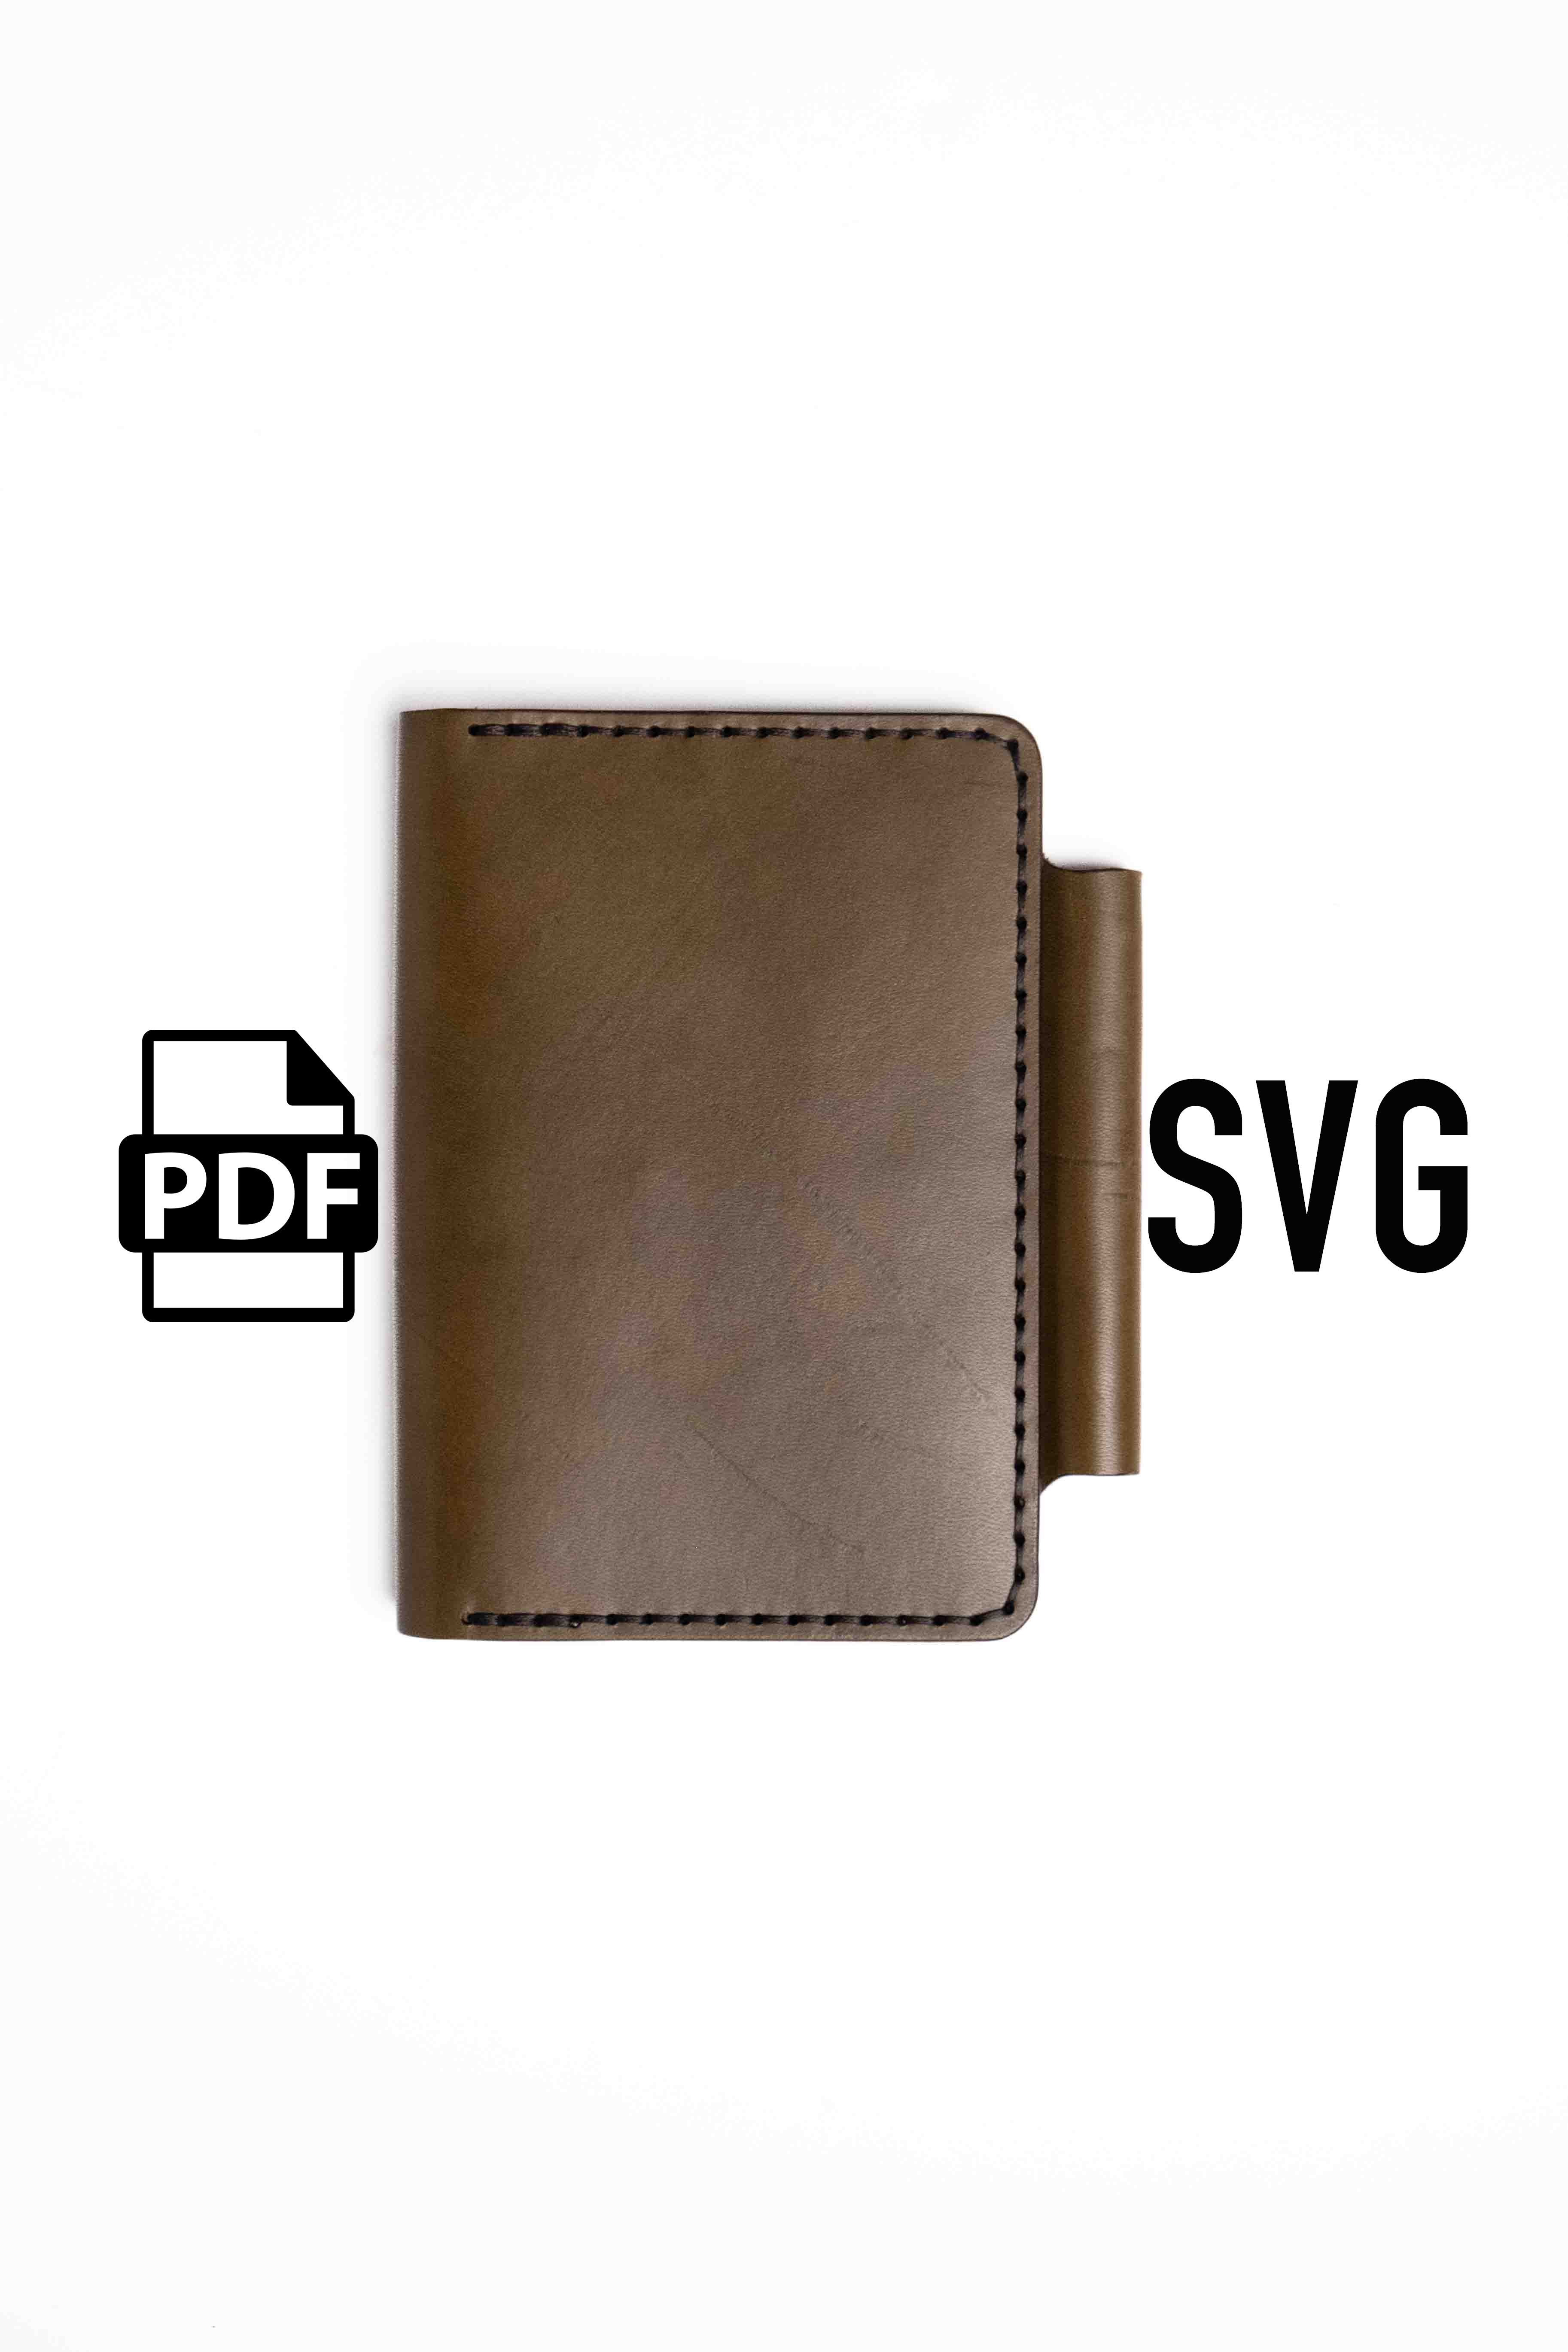 Making The Half Dome Field Notes Cover| PDF/SVG Template